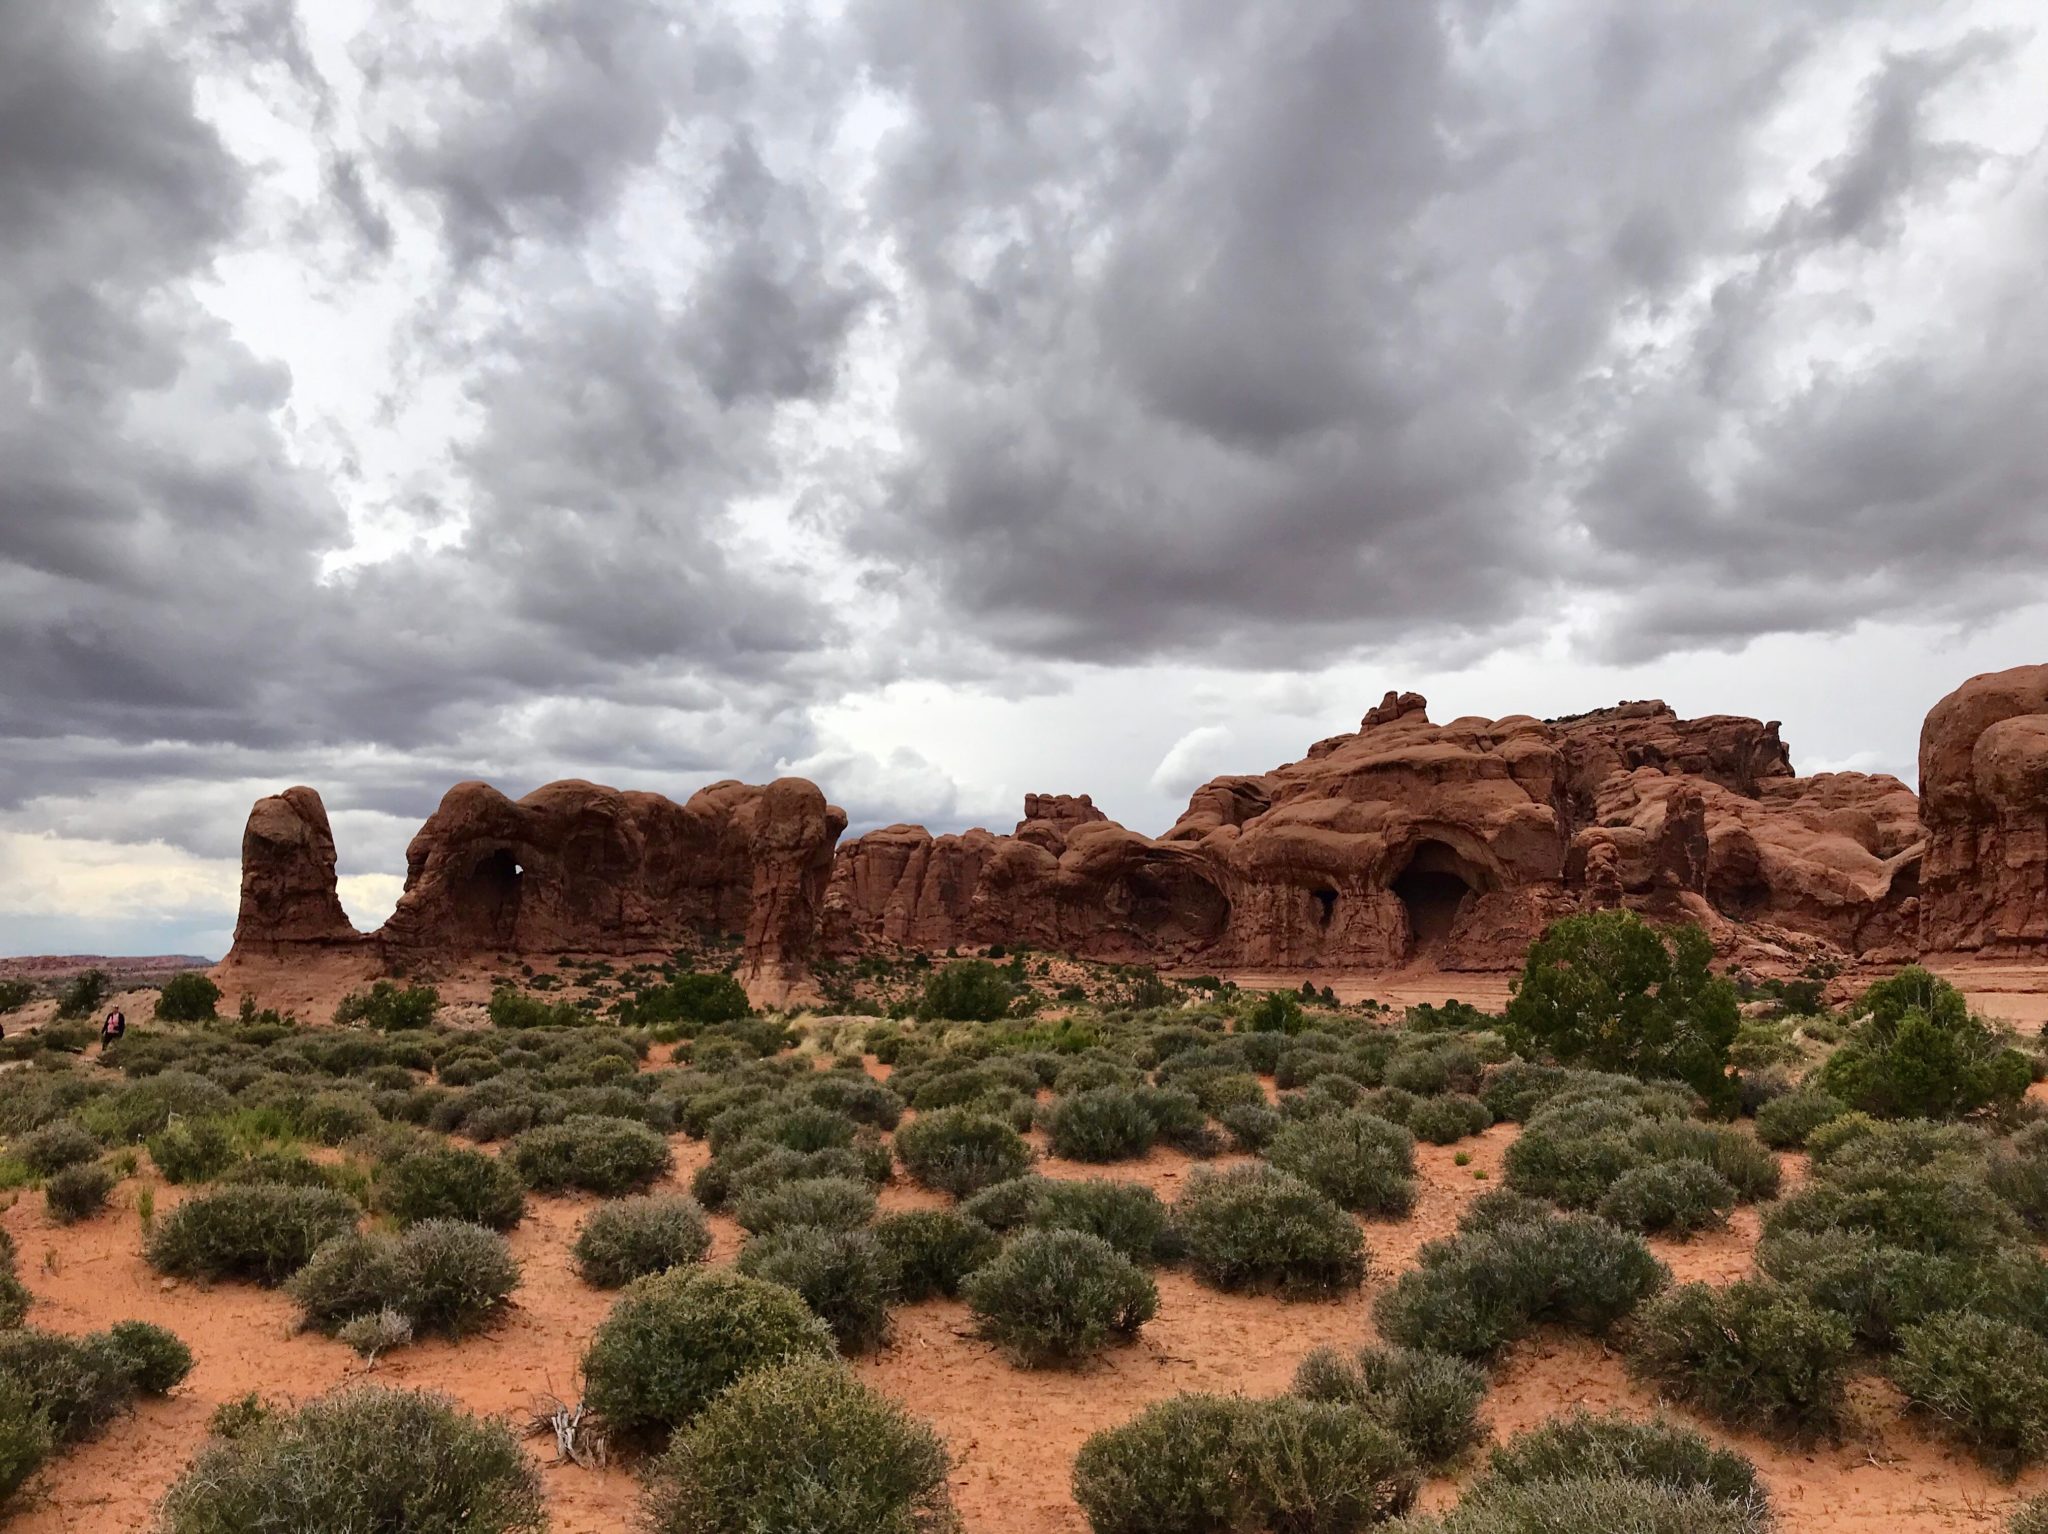 Sage and brush landscape with wind-carved rock formations in the background.